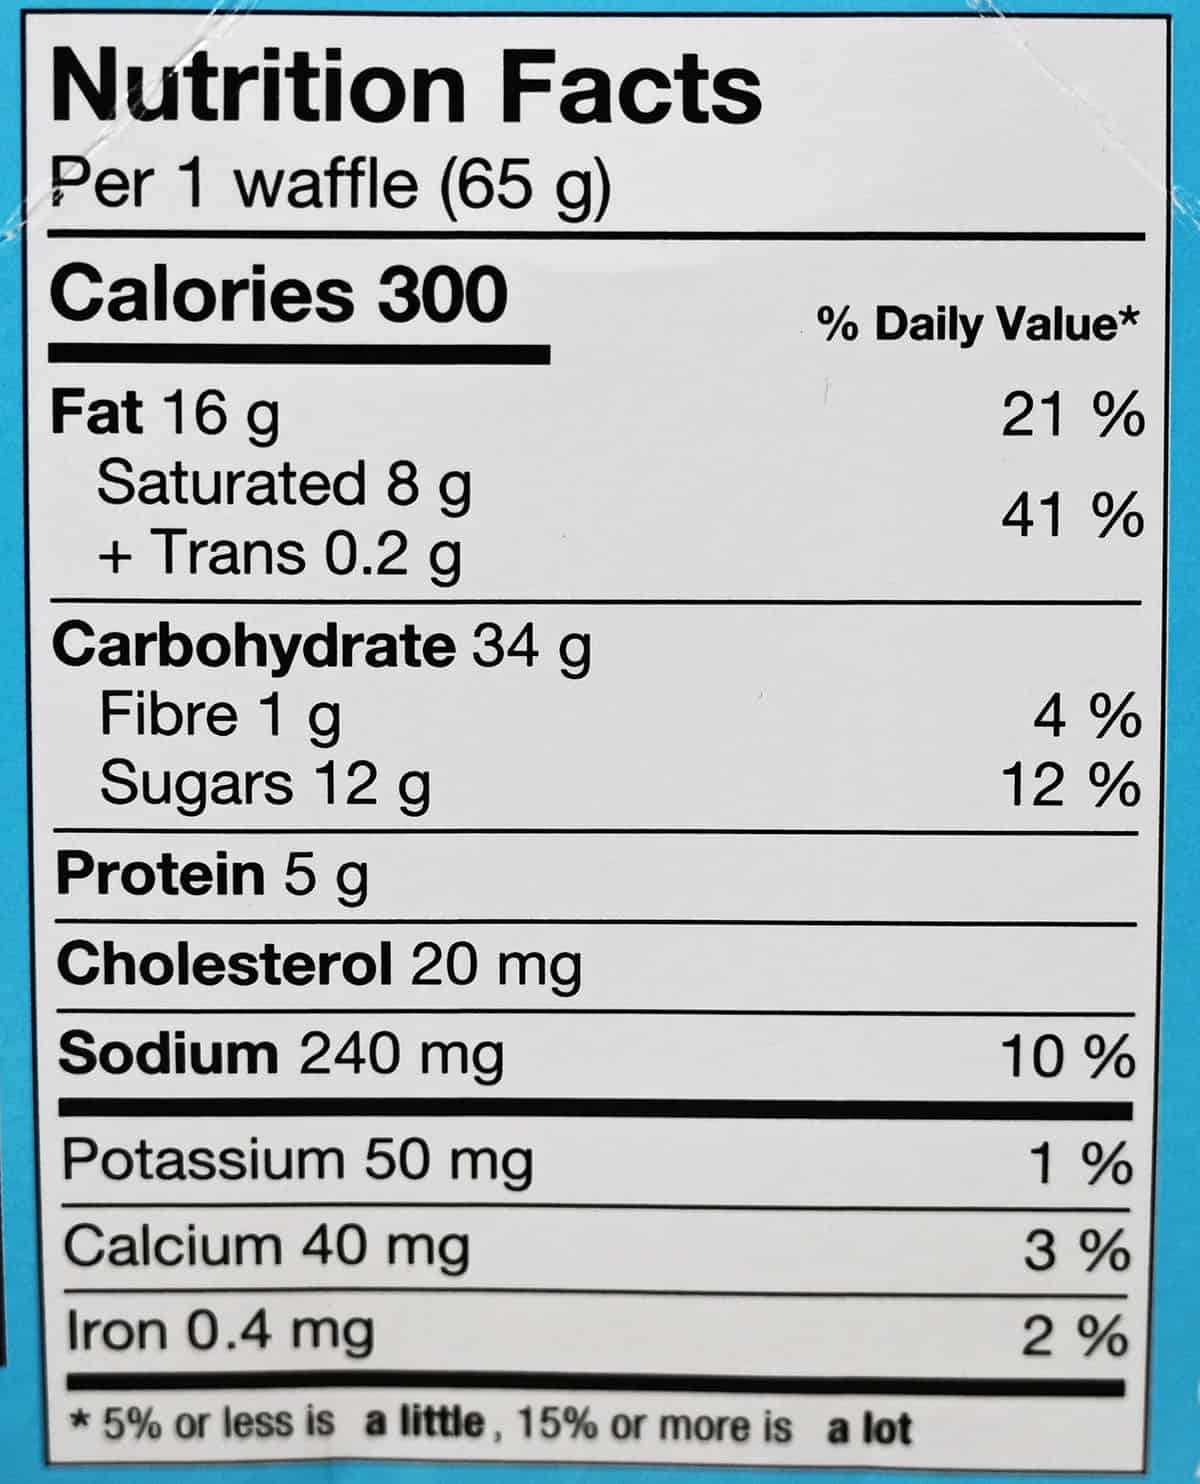 Image of the waffle nutrition facts from the box.